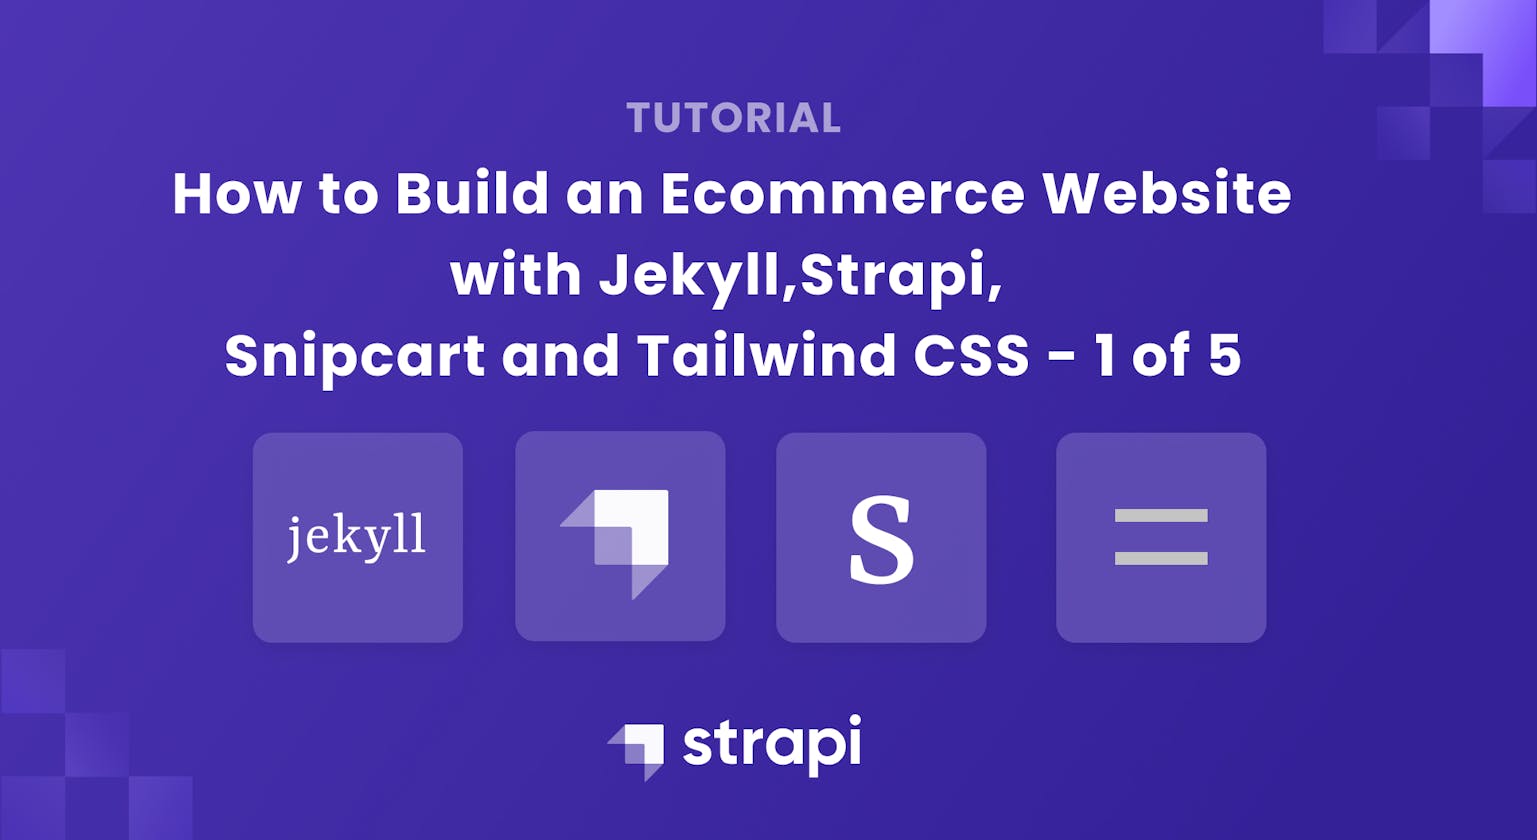 Building an Ecommerce Website with Jekyll, Strapi, Snipcart and Tailwind CSS [1 of 5]